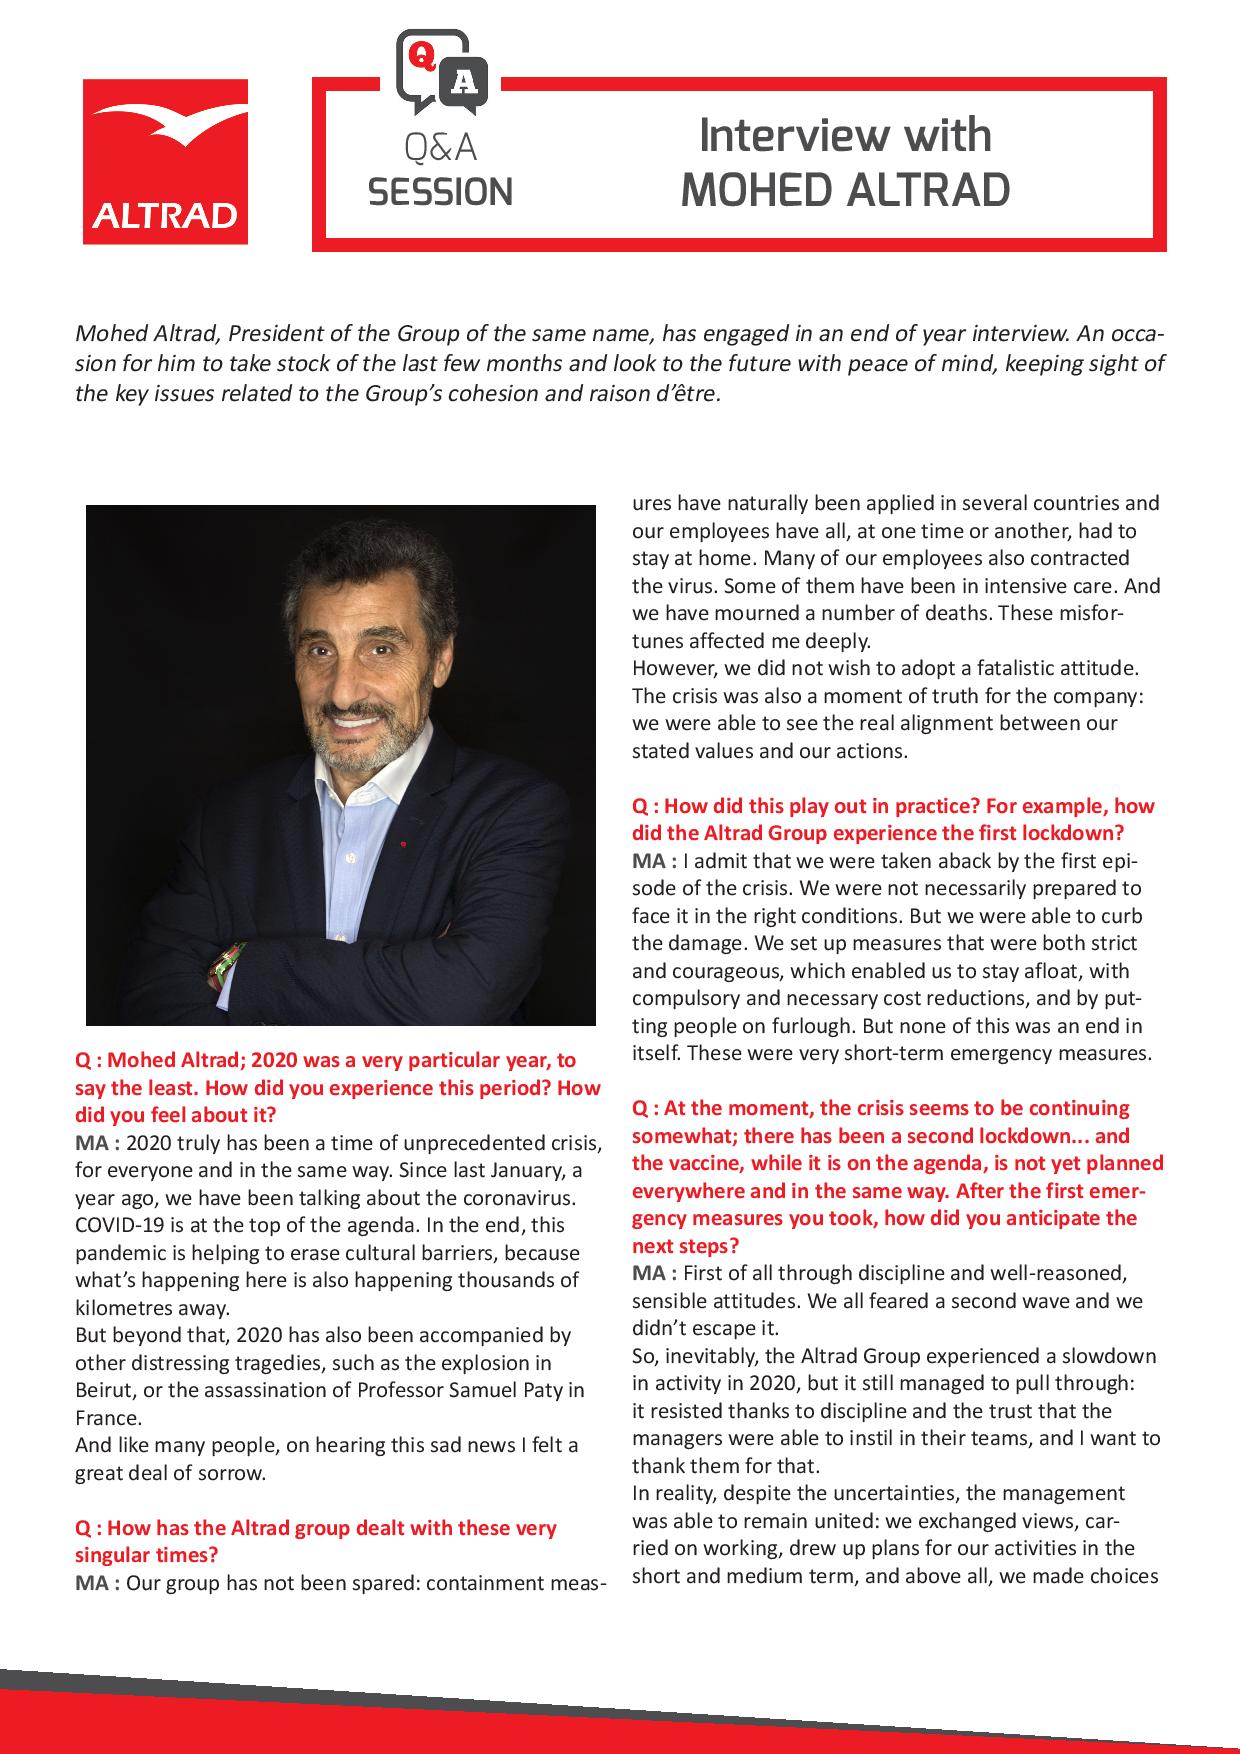 Mohed Altrad - Interview